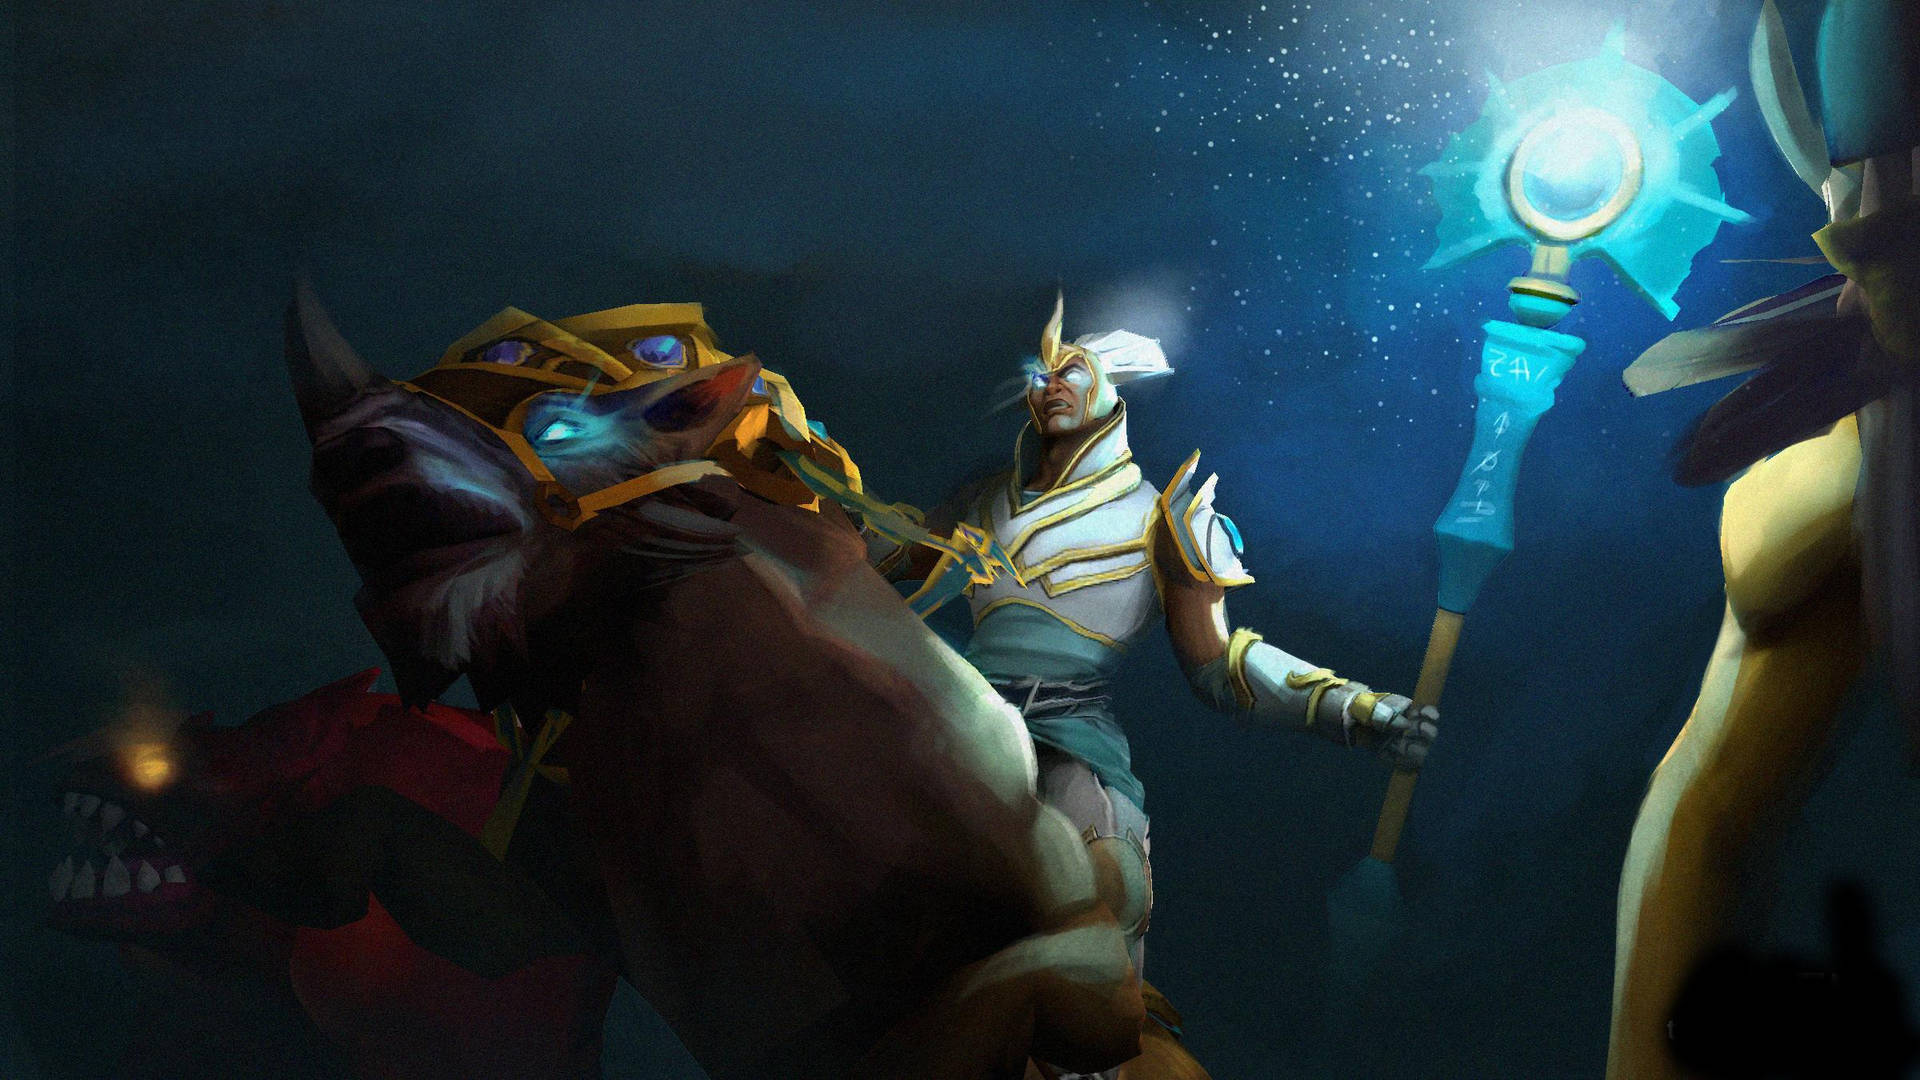 Dota 2 Wallpapers 93 images inside